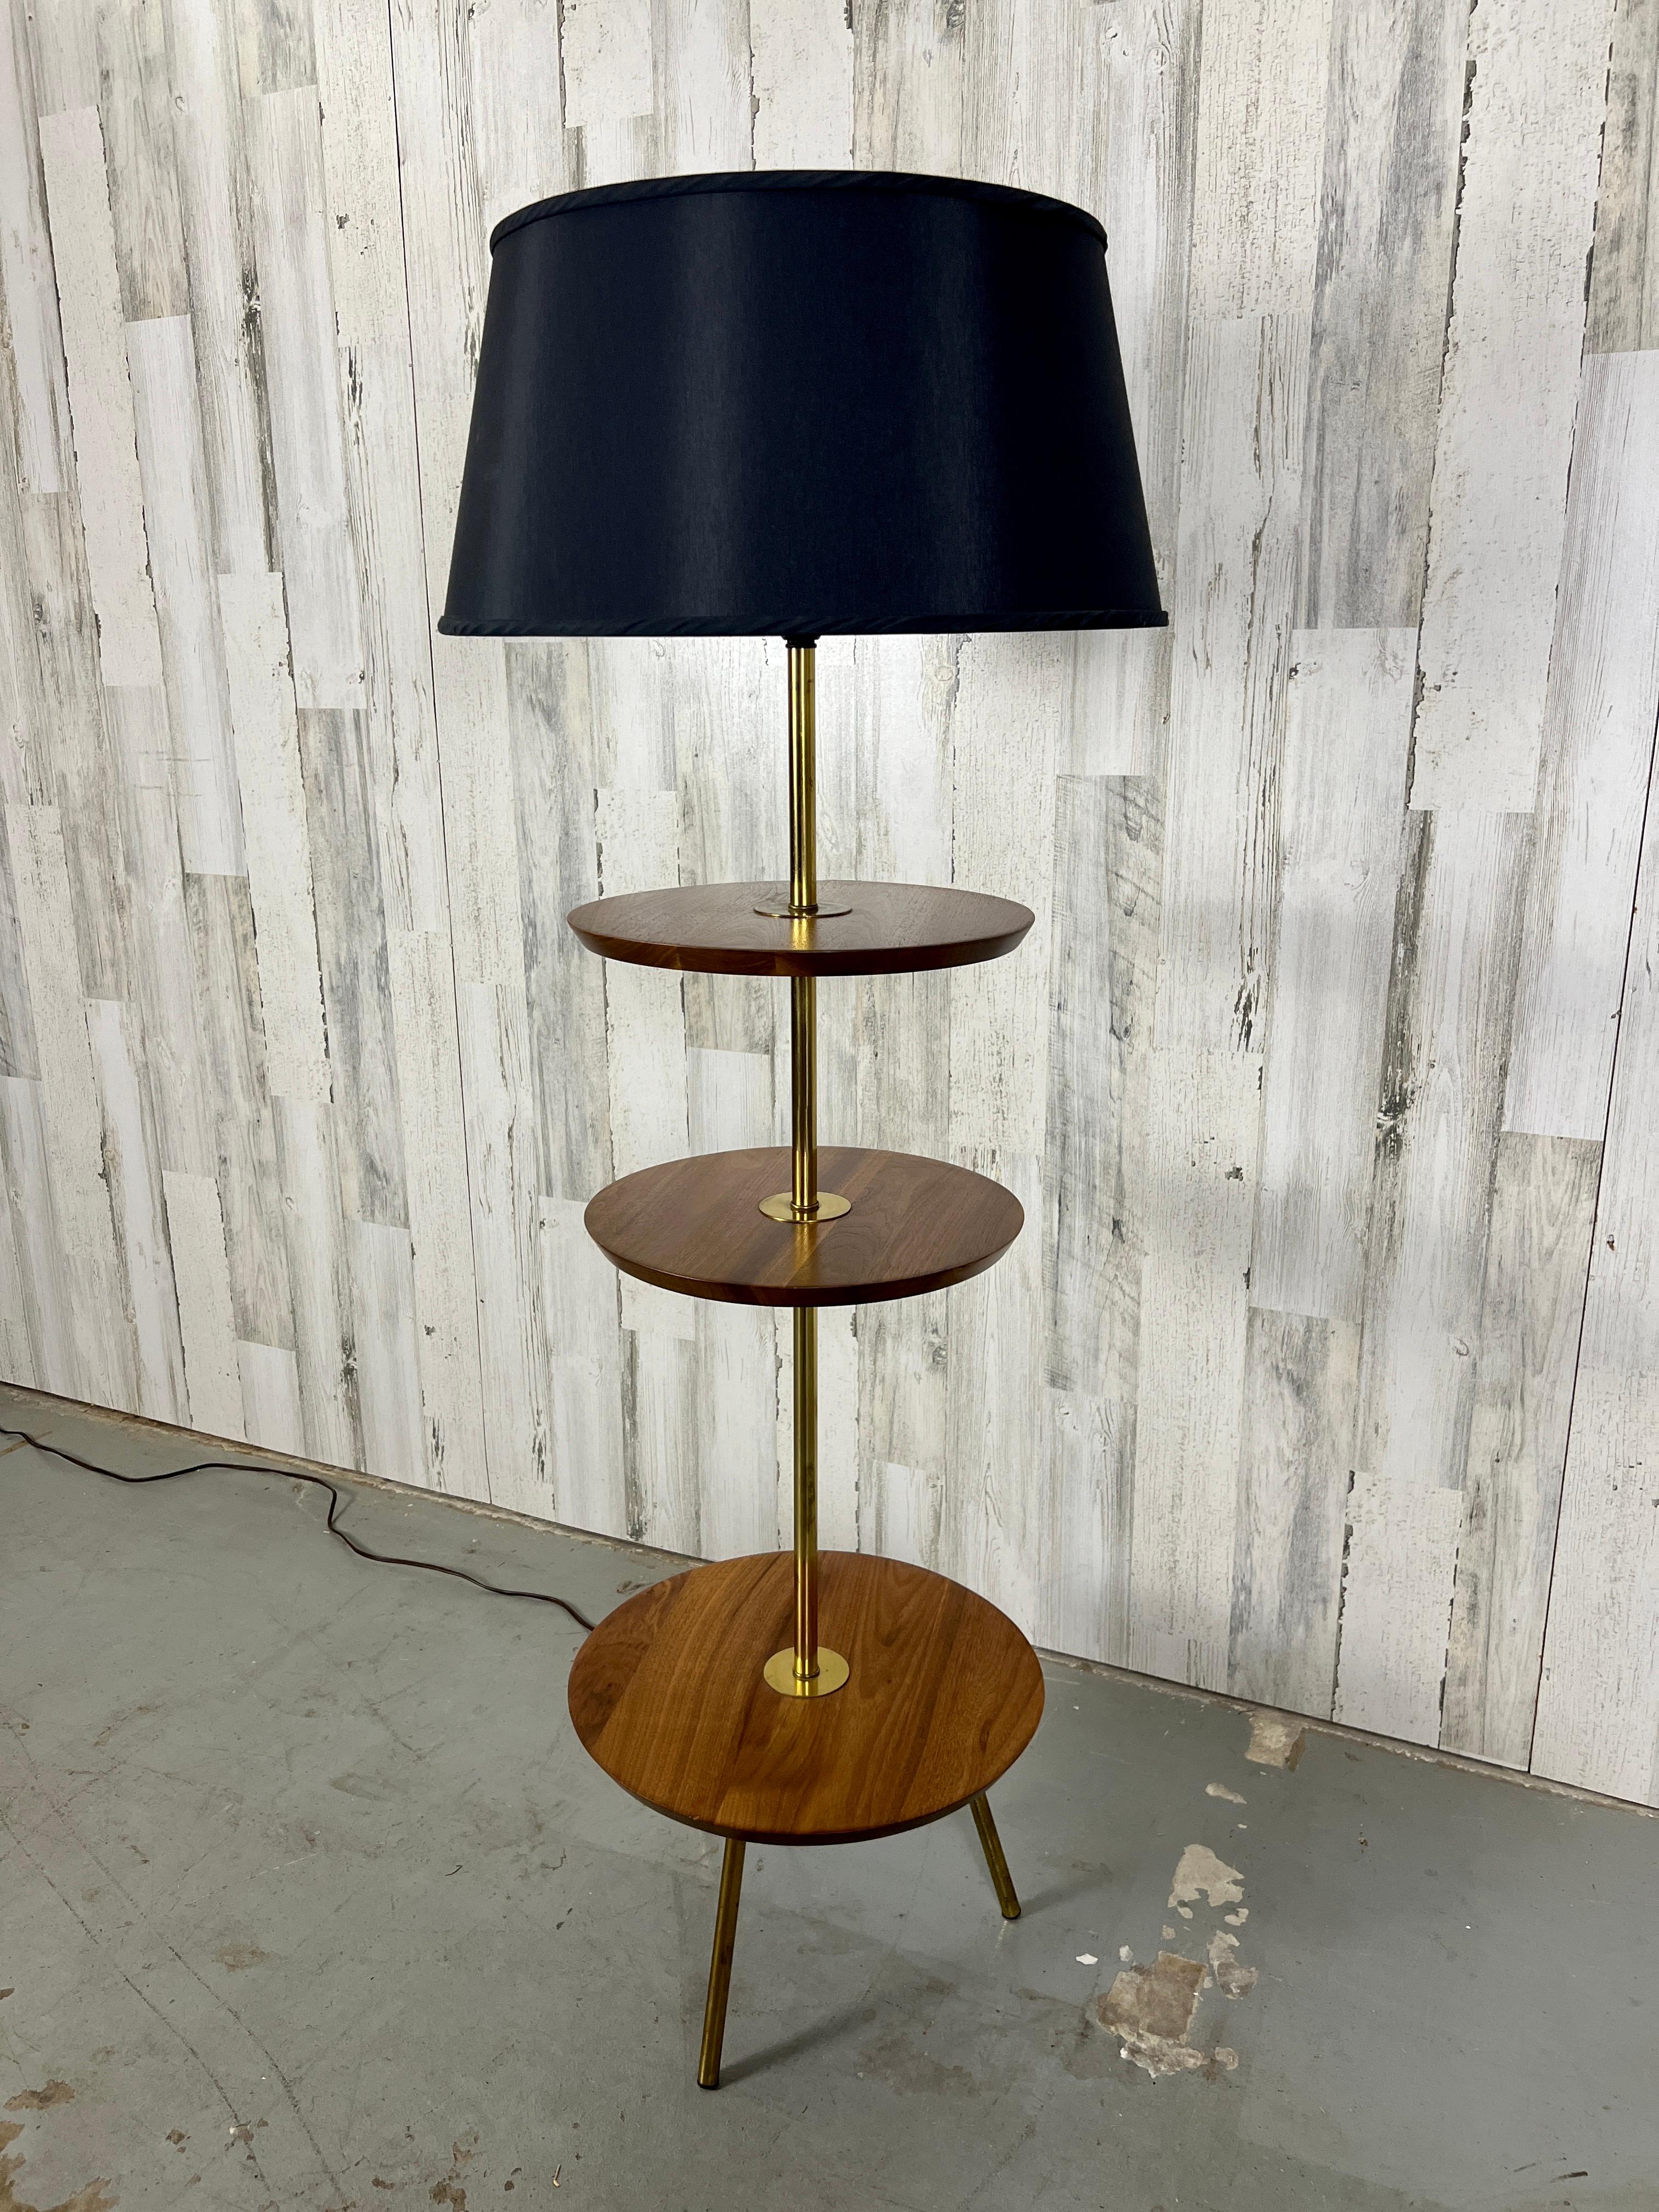 North American 1960s Tri-Tiered Mid-Century Floor Lamp For Sale